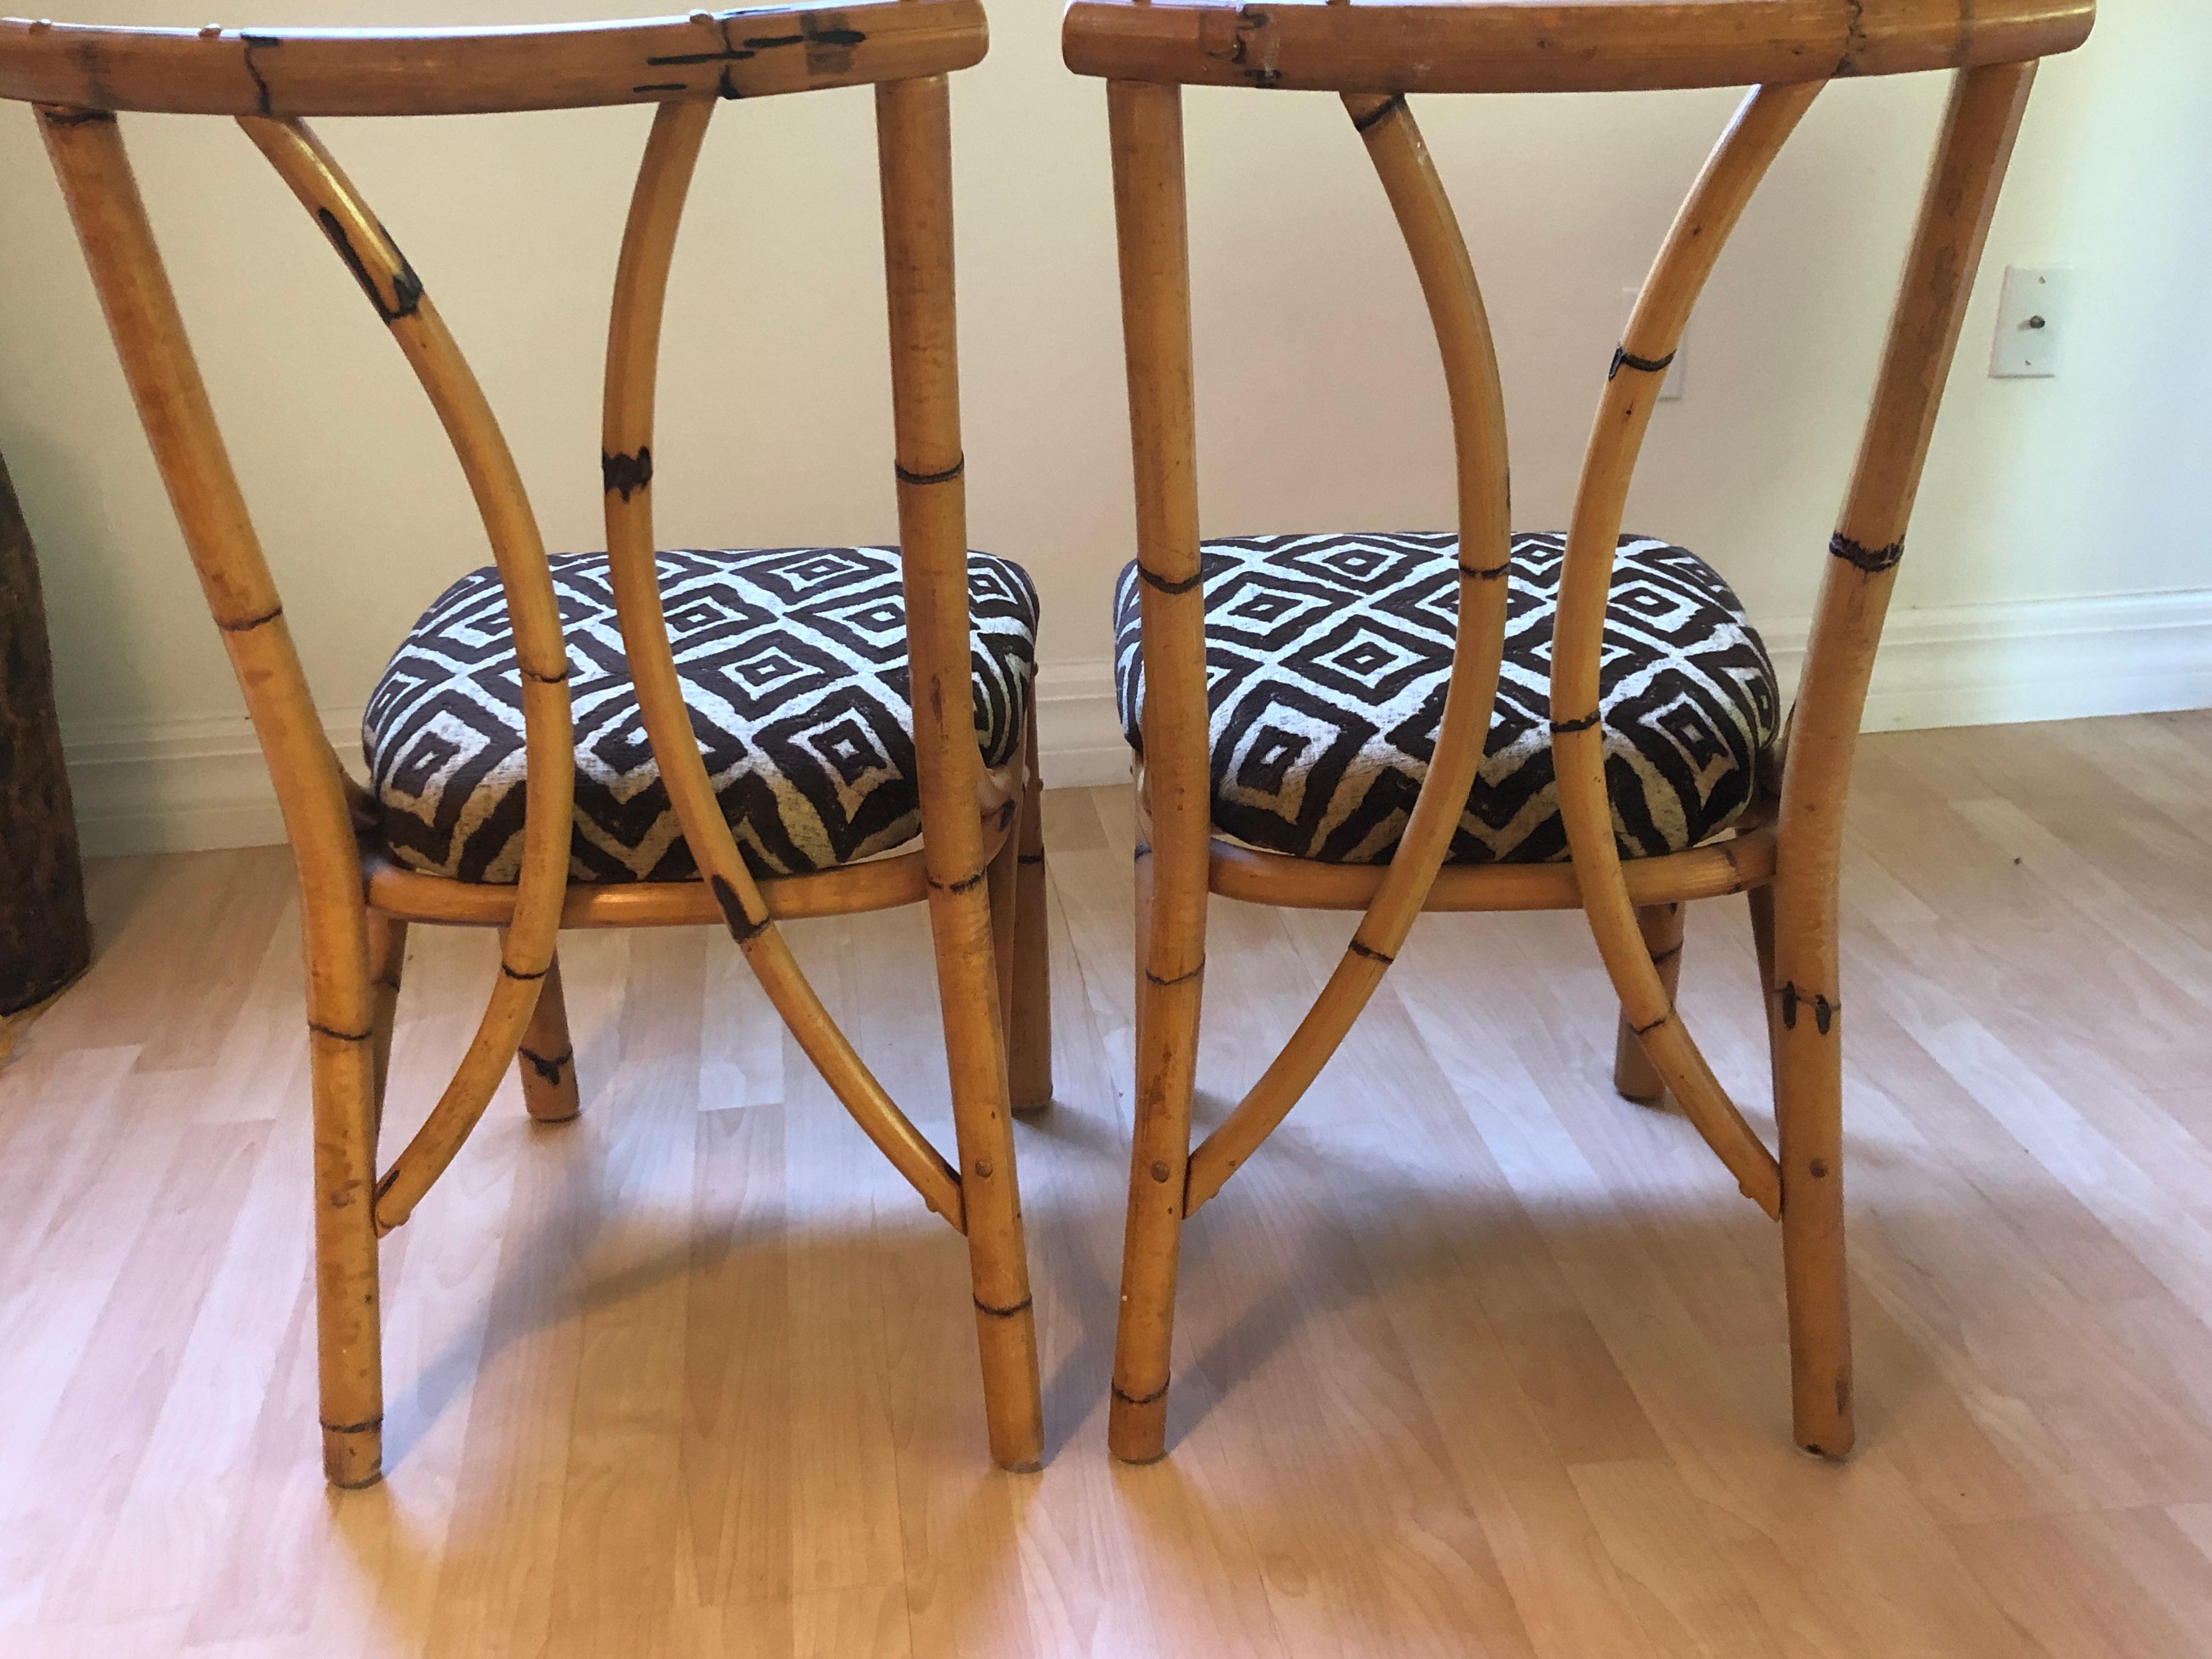 Pair of antique south seas bamboo chairs with polynesian hawaiian fabric In Good Condition For Sale In Sarasota, FL